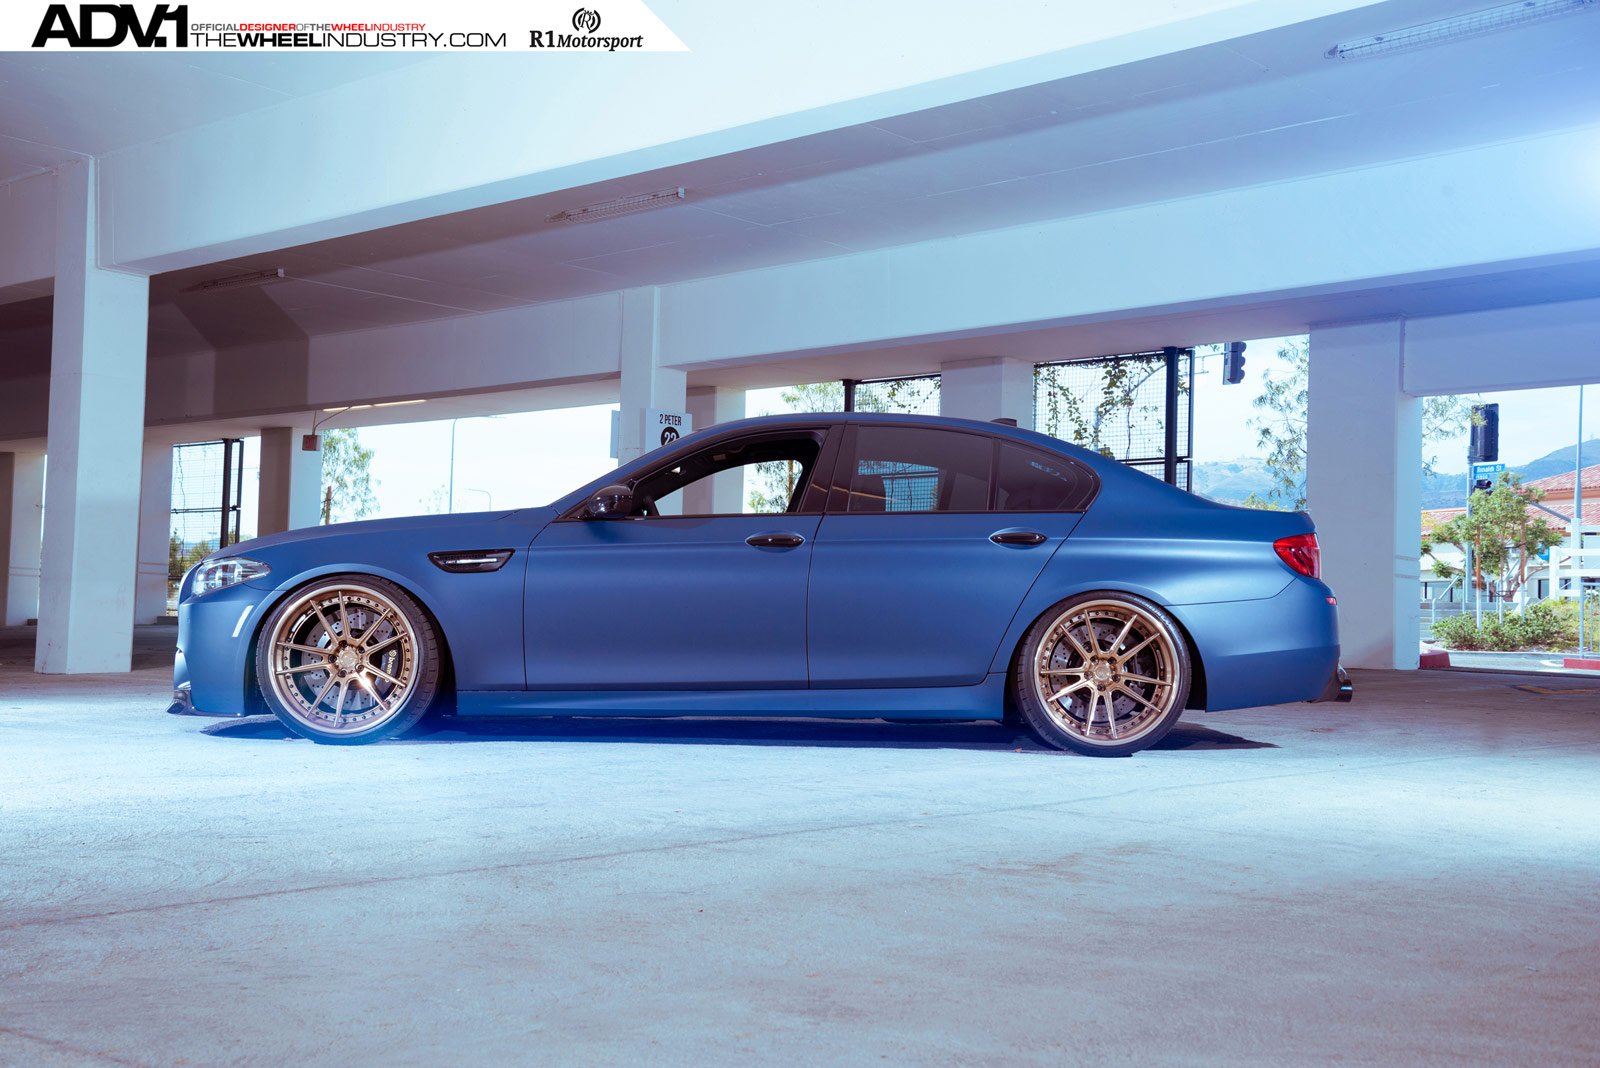 2015, Adv1, Wheels, Bmw, M5, F10, Cars, Coupe, Tuning Wallpaper